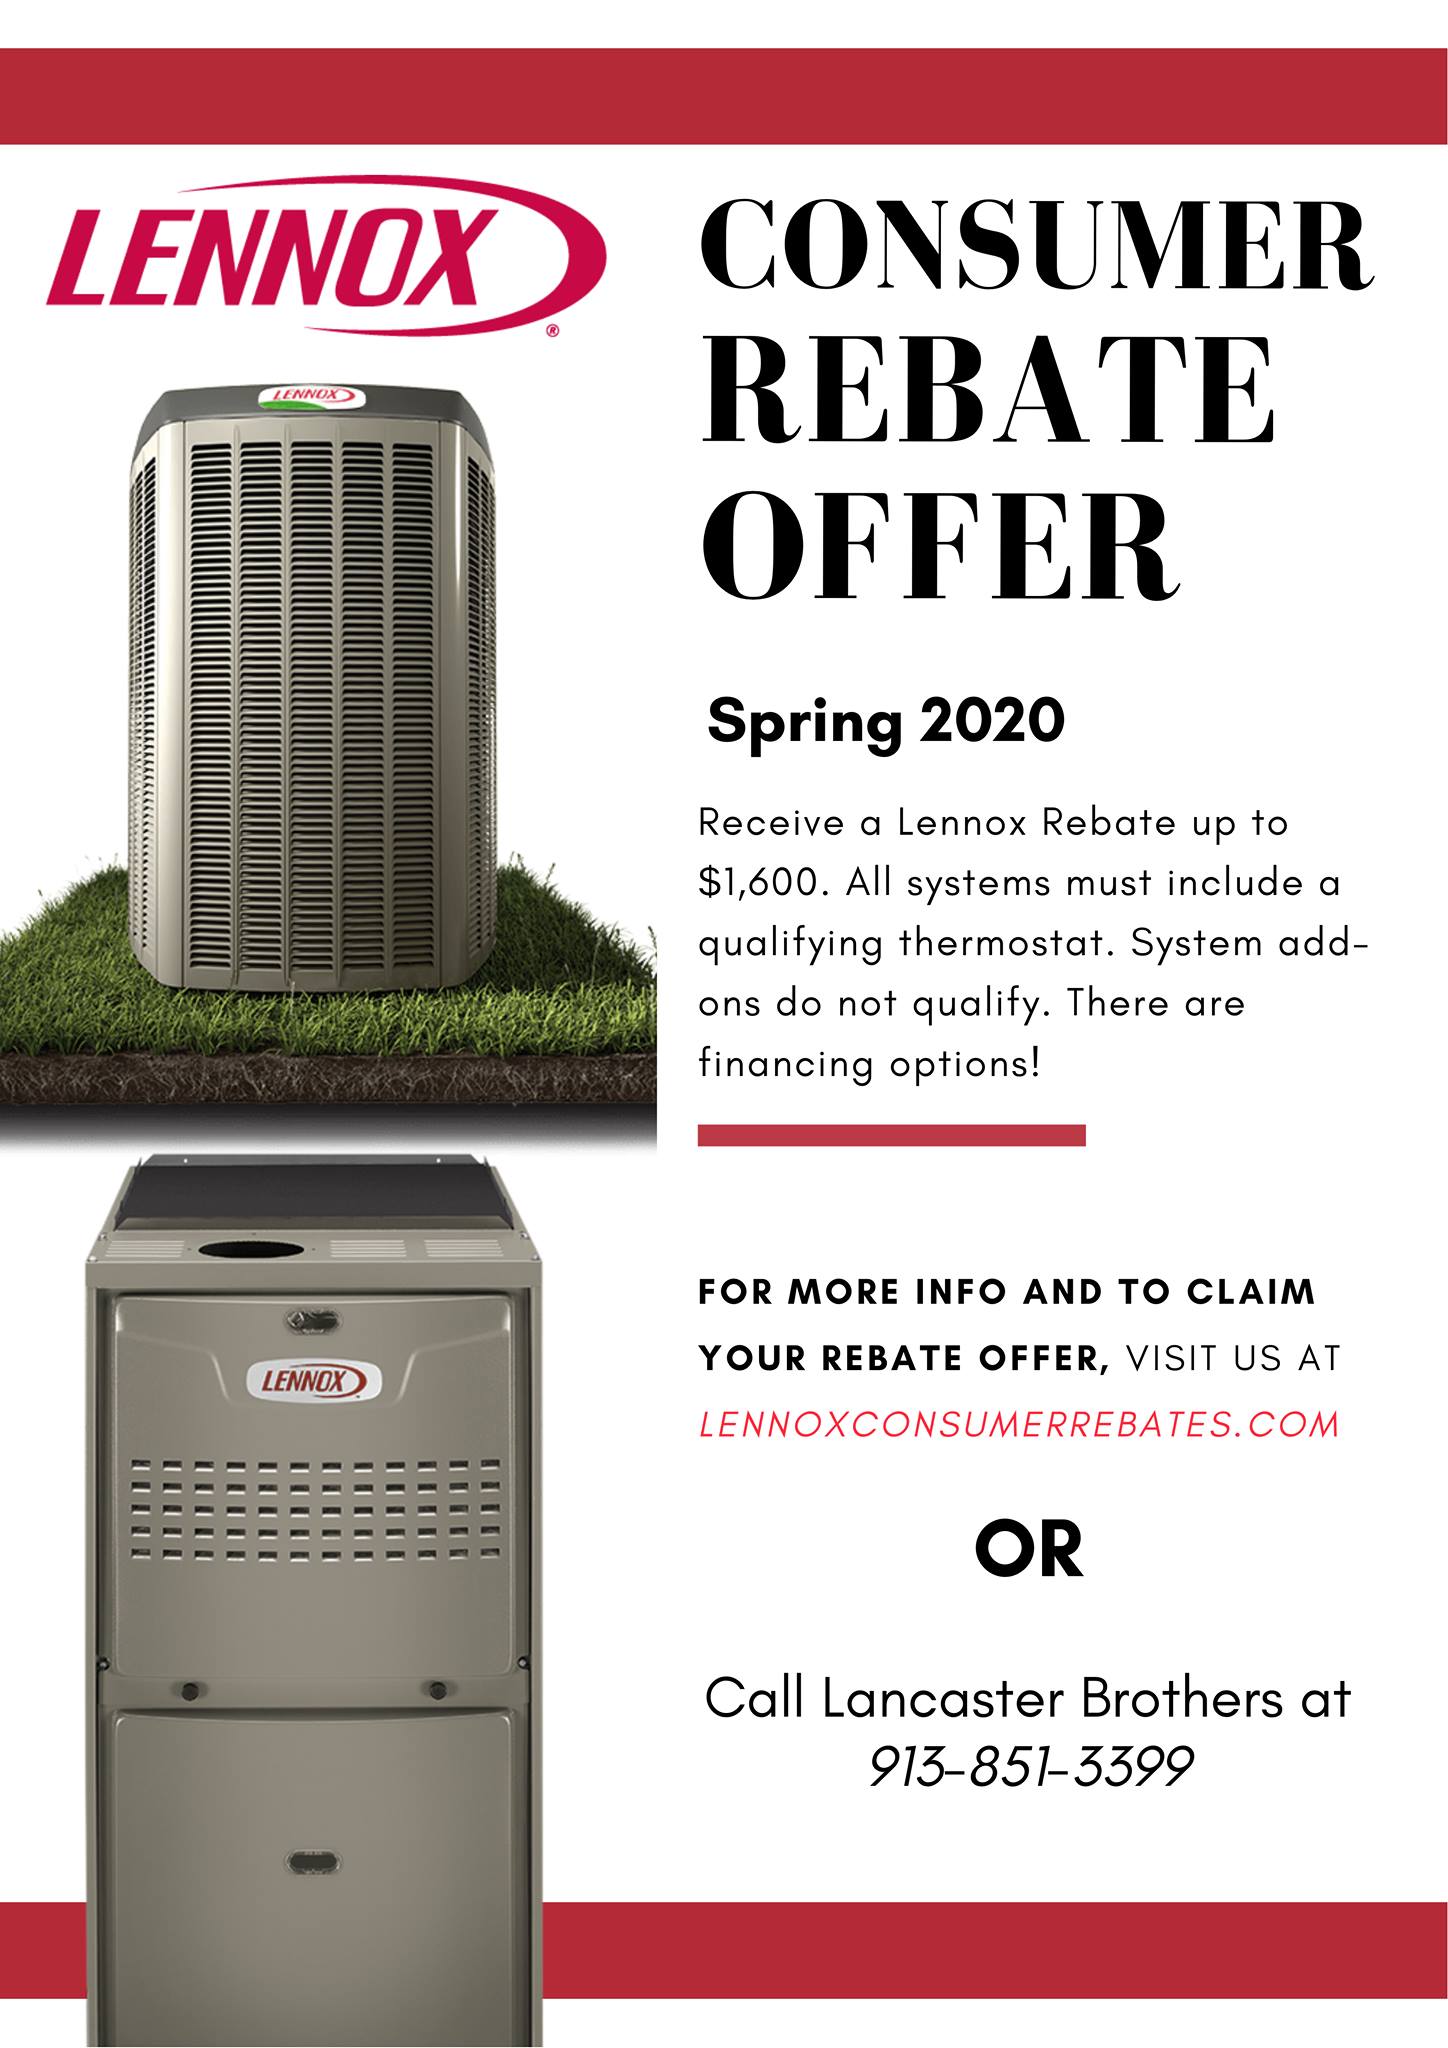 Lancaster Brothers Heating and Cooling, Inc. 208 W Crestview Dr, Louisburg Kansas 66053